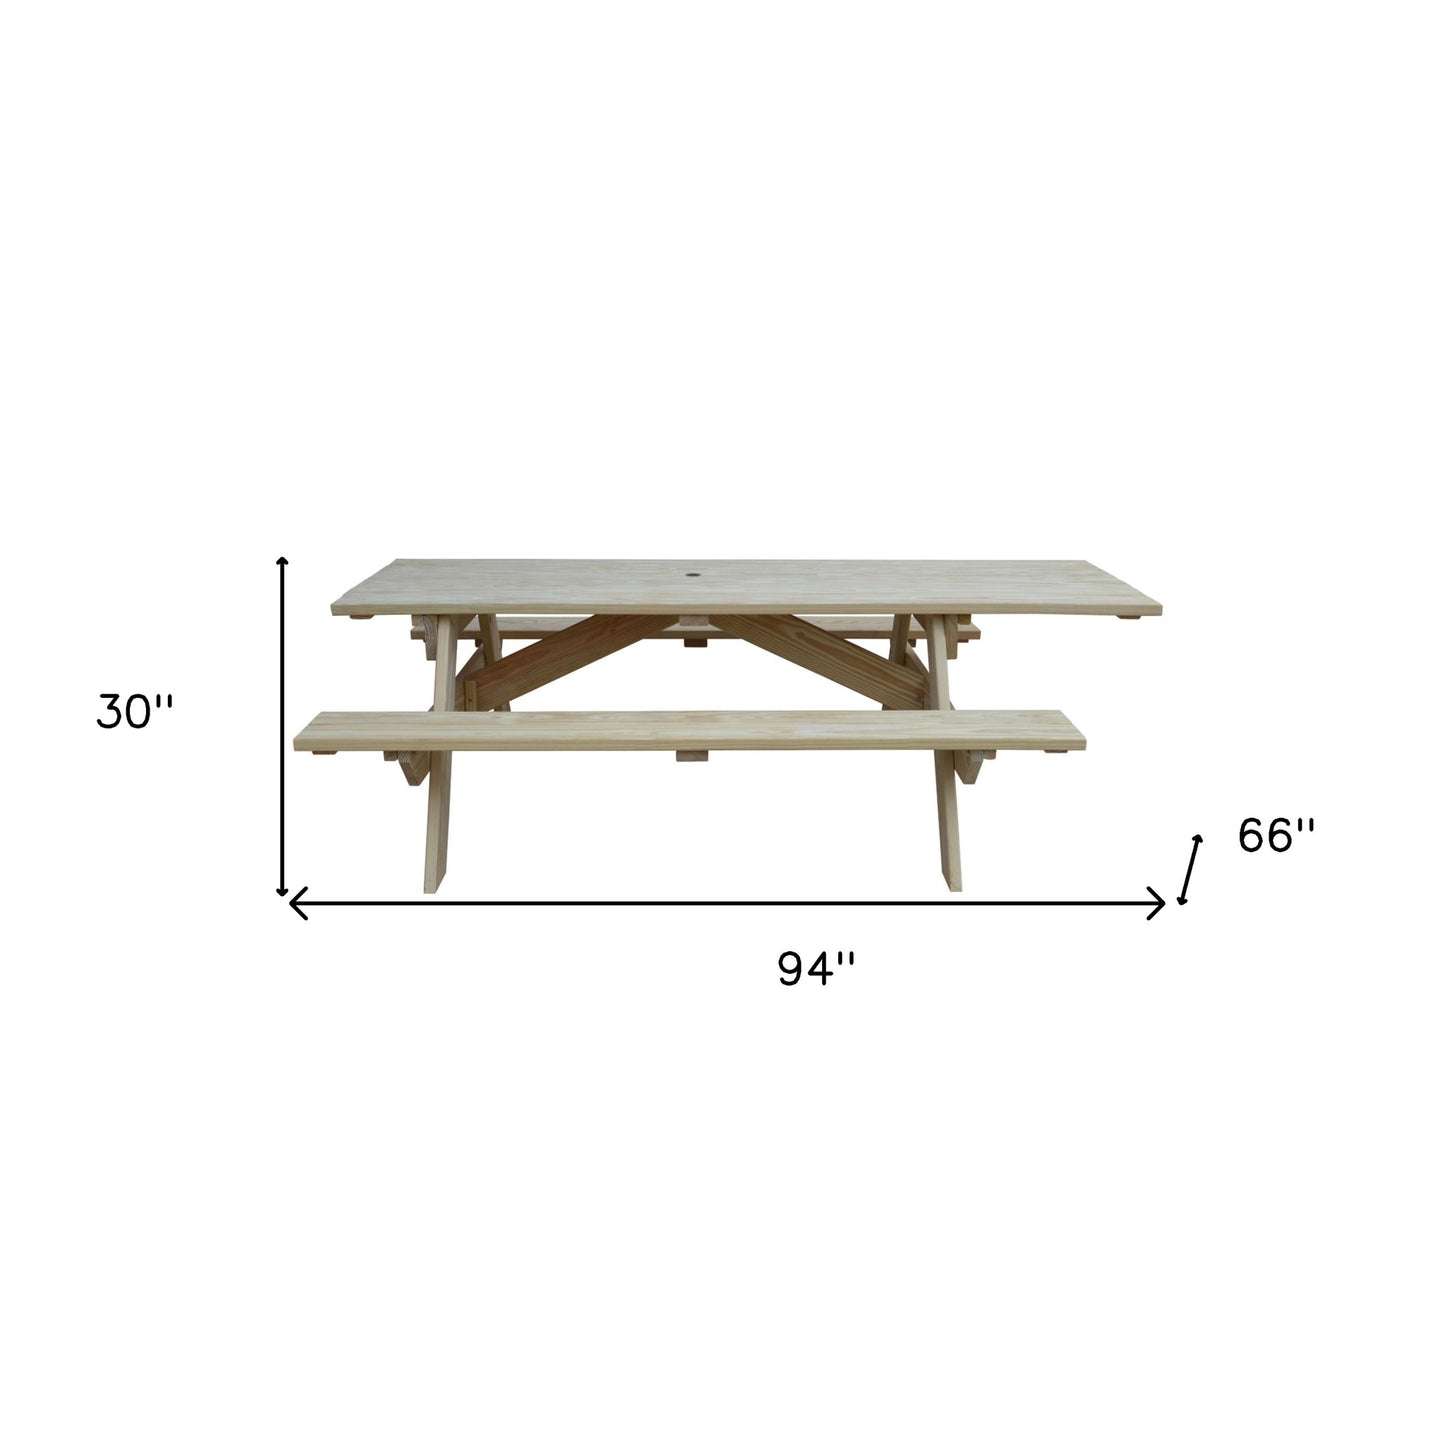 Beige Solid Wood Outdoor Picnic Table Umbrella Hole